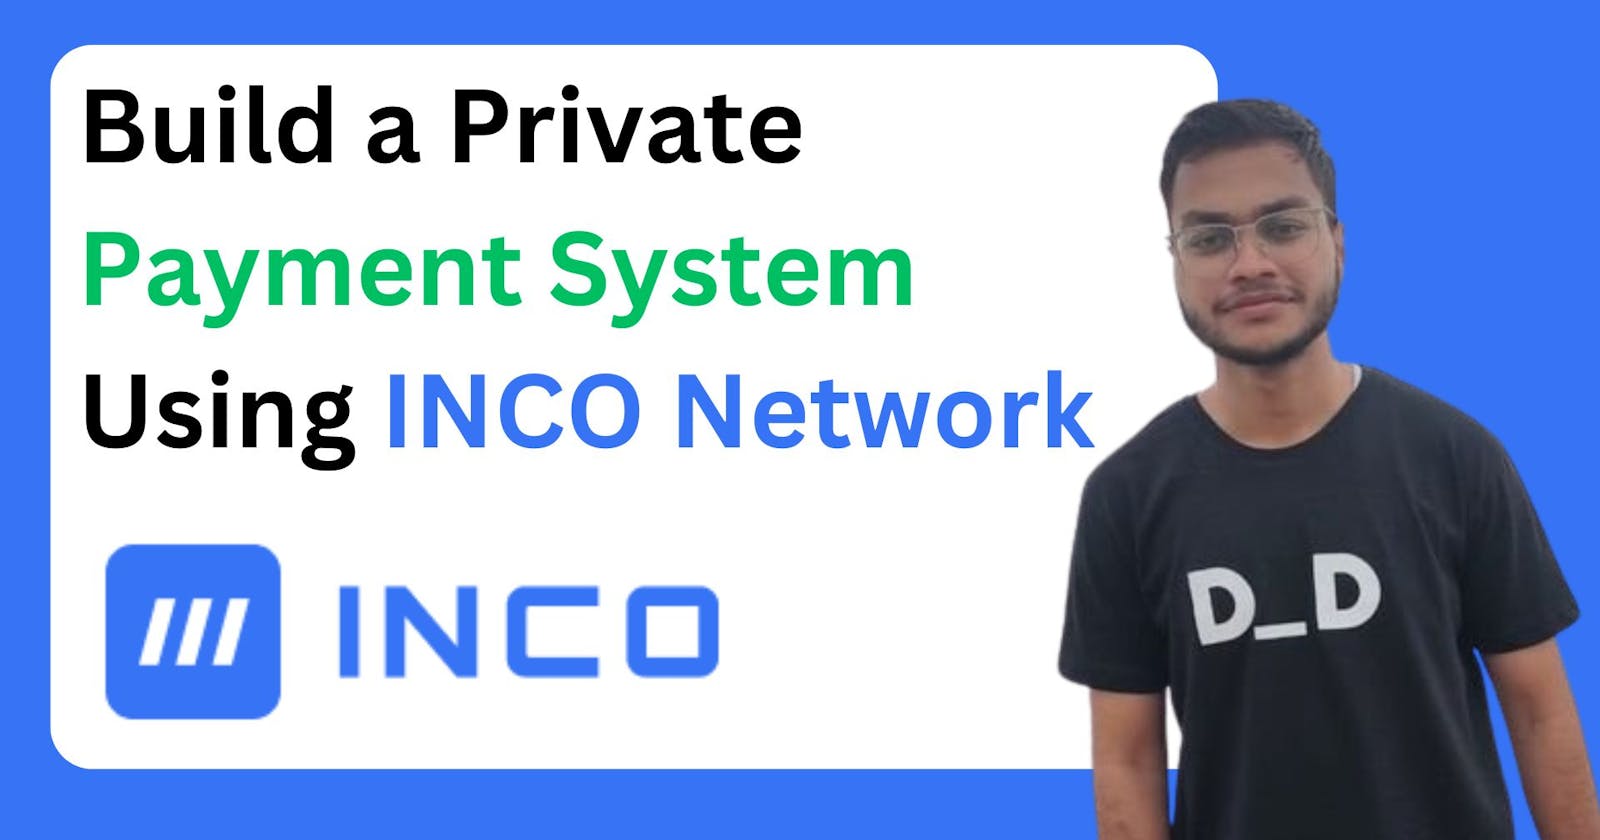 Build a Private Payment System Using INCO Network